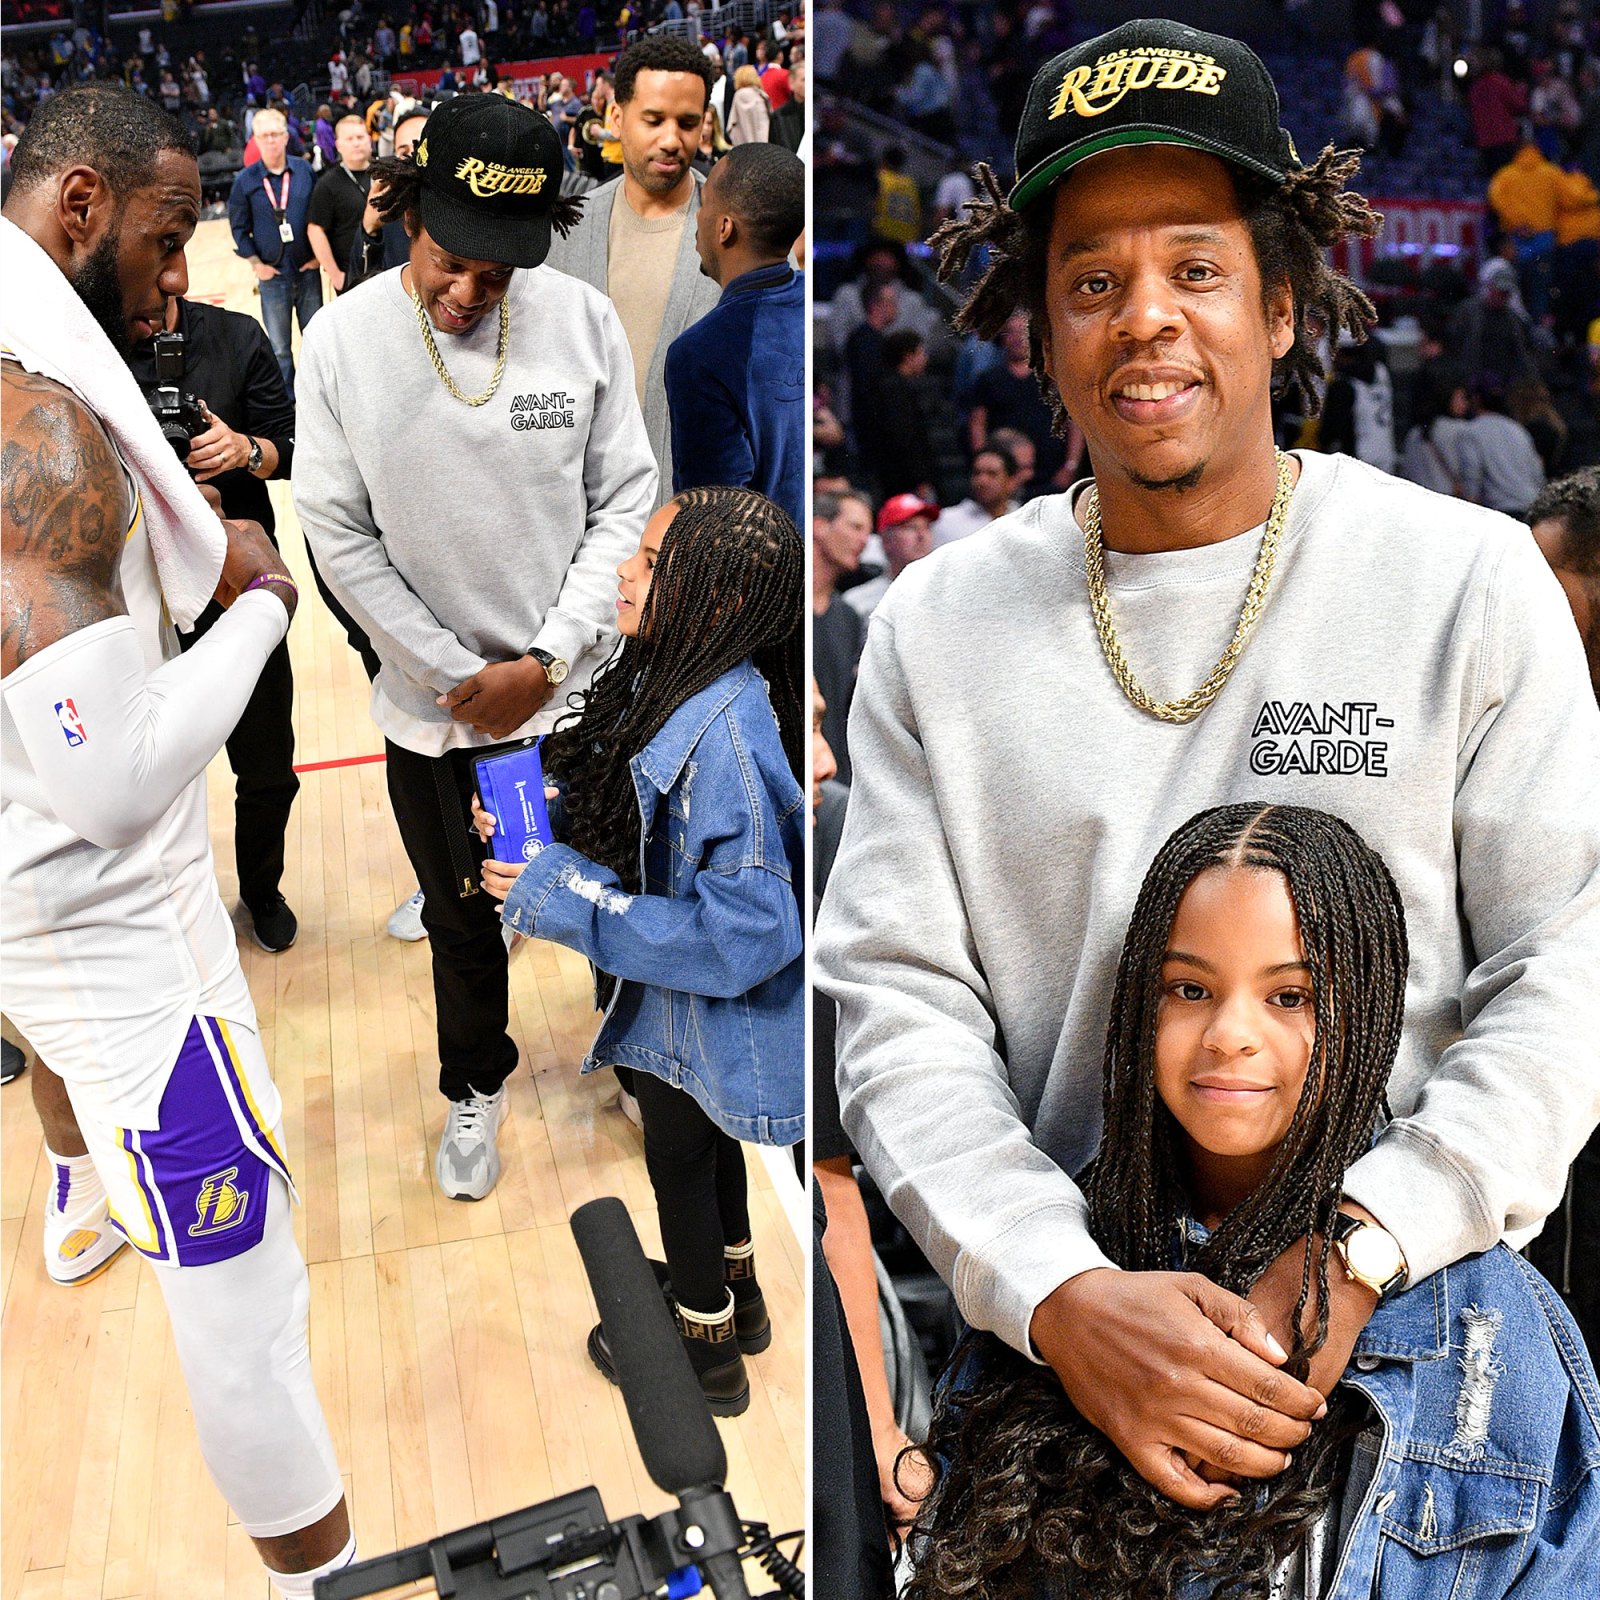 See Blue Ivy Attend NBA Game With Dad Jay-Z